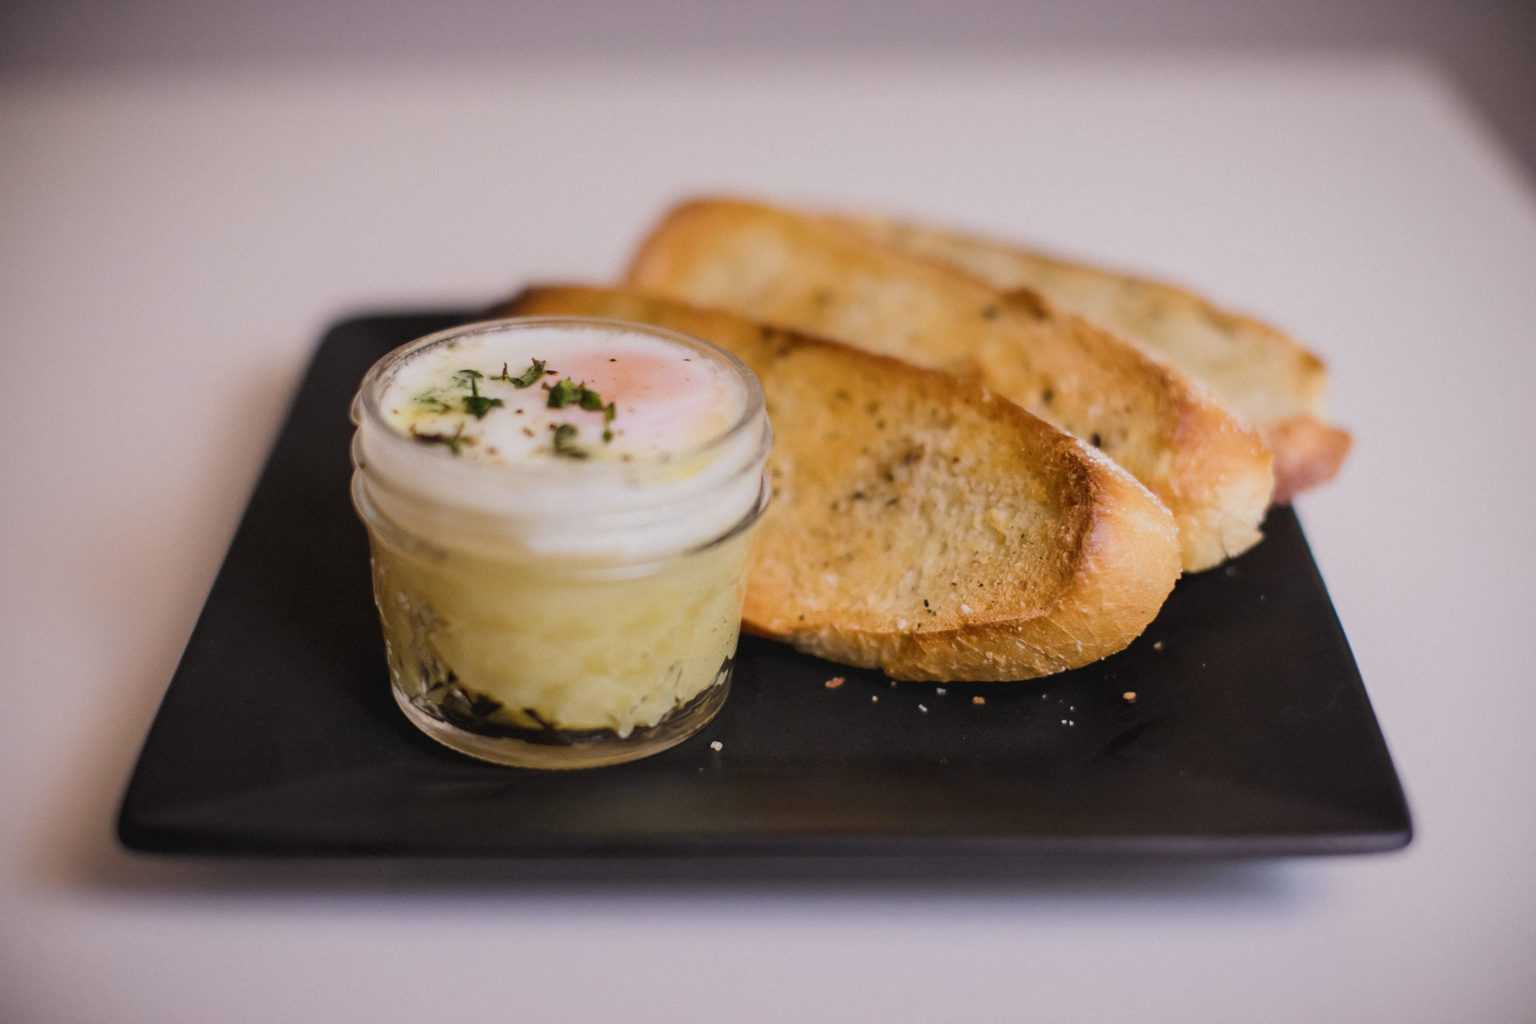 Instant pot copycat eggslut in a small glass container with buttered toast placed on a black plate